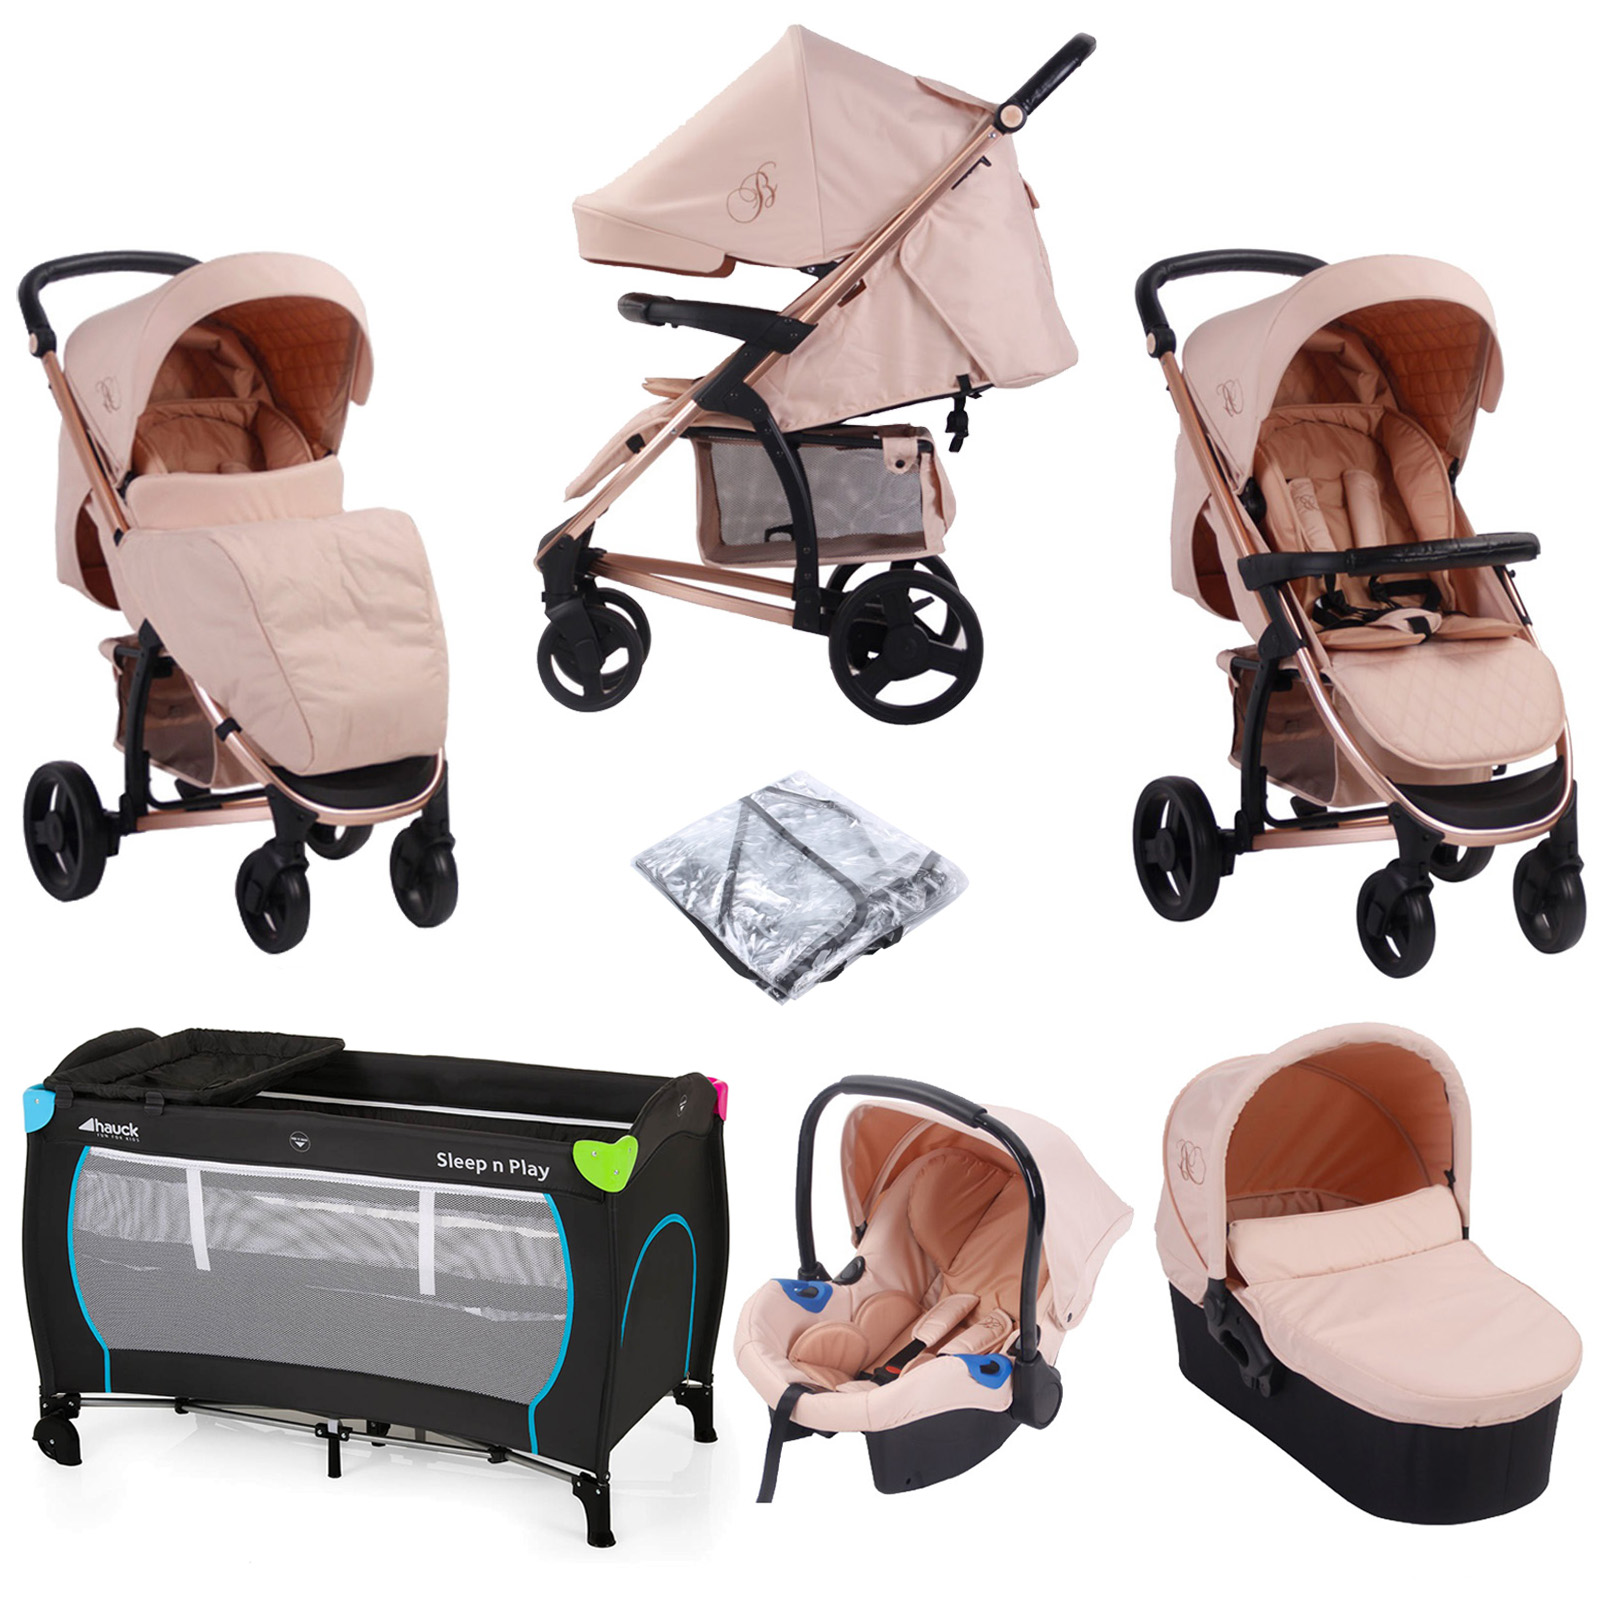 billie faiers travel systems